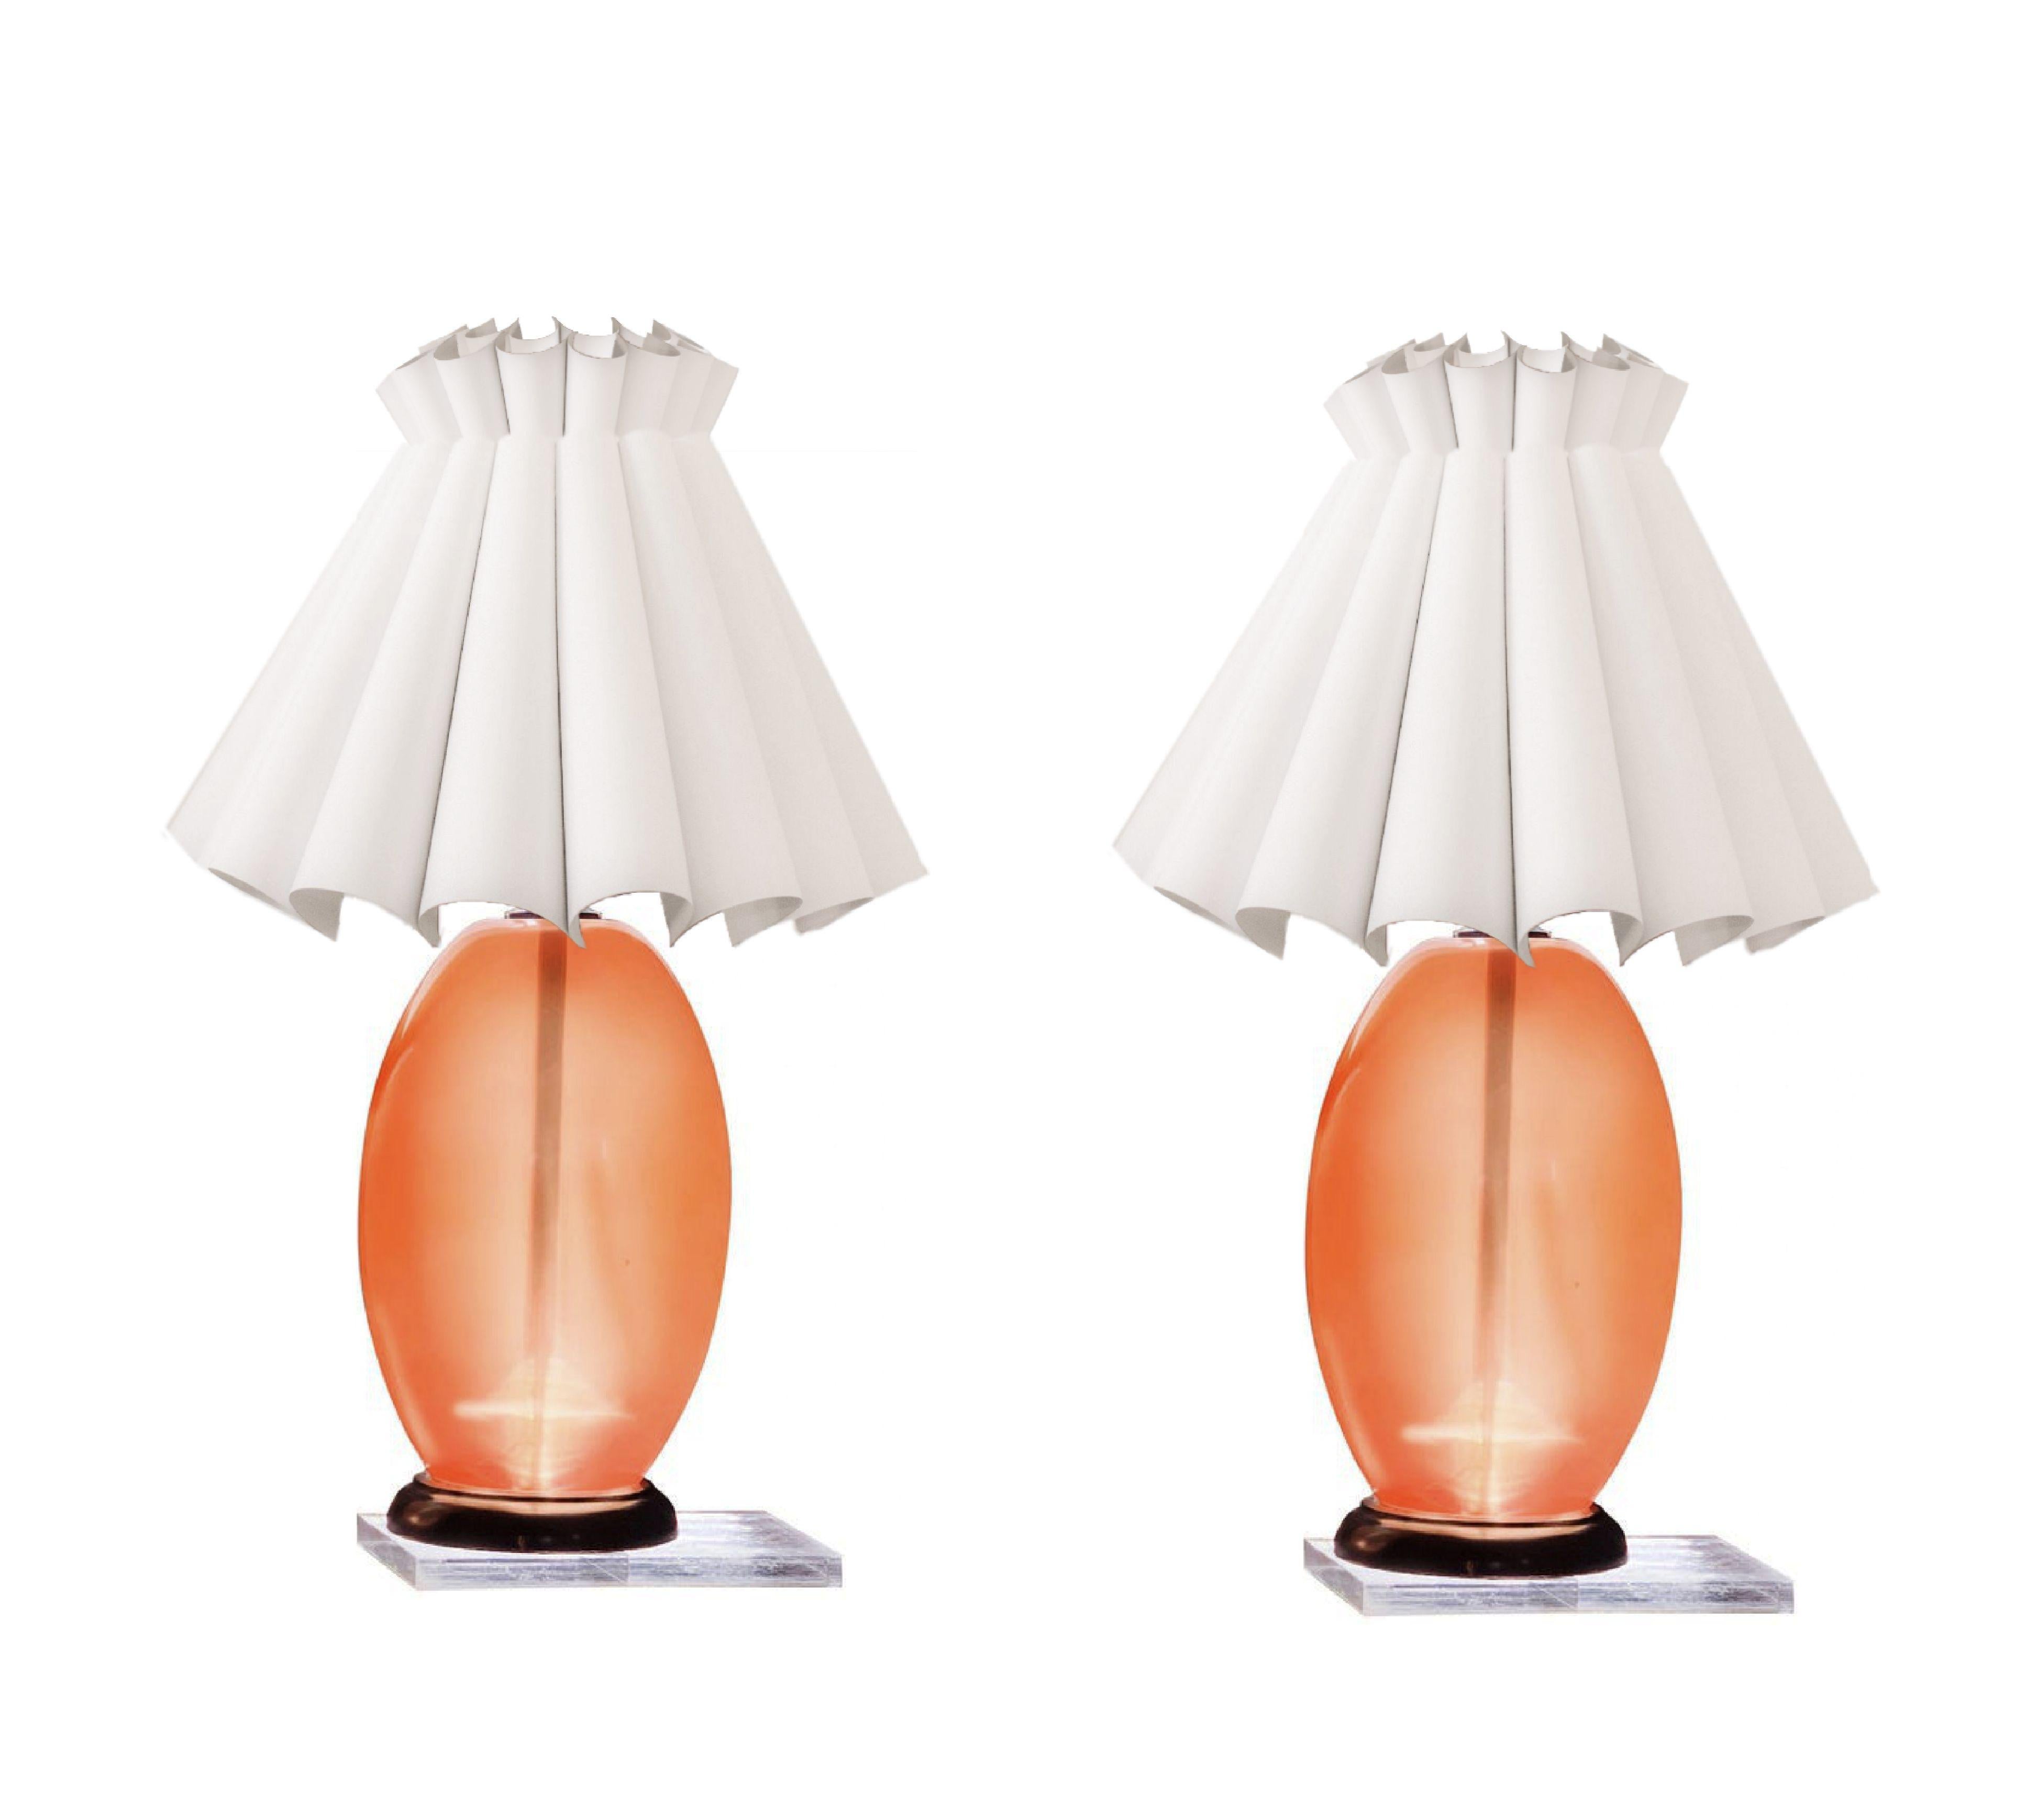 Modern Peach Lucite Midcentury Monumental Sculptural Egg Form Table Lamp In Good Condition For Sale In Brooklyn, NY